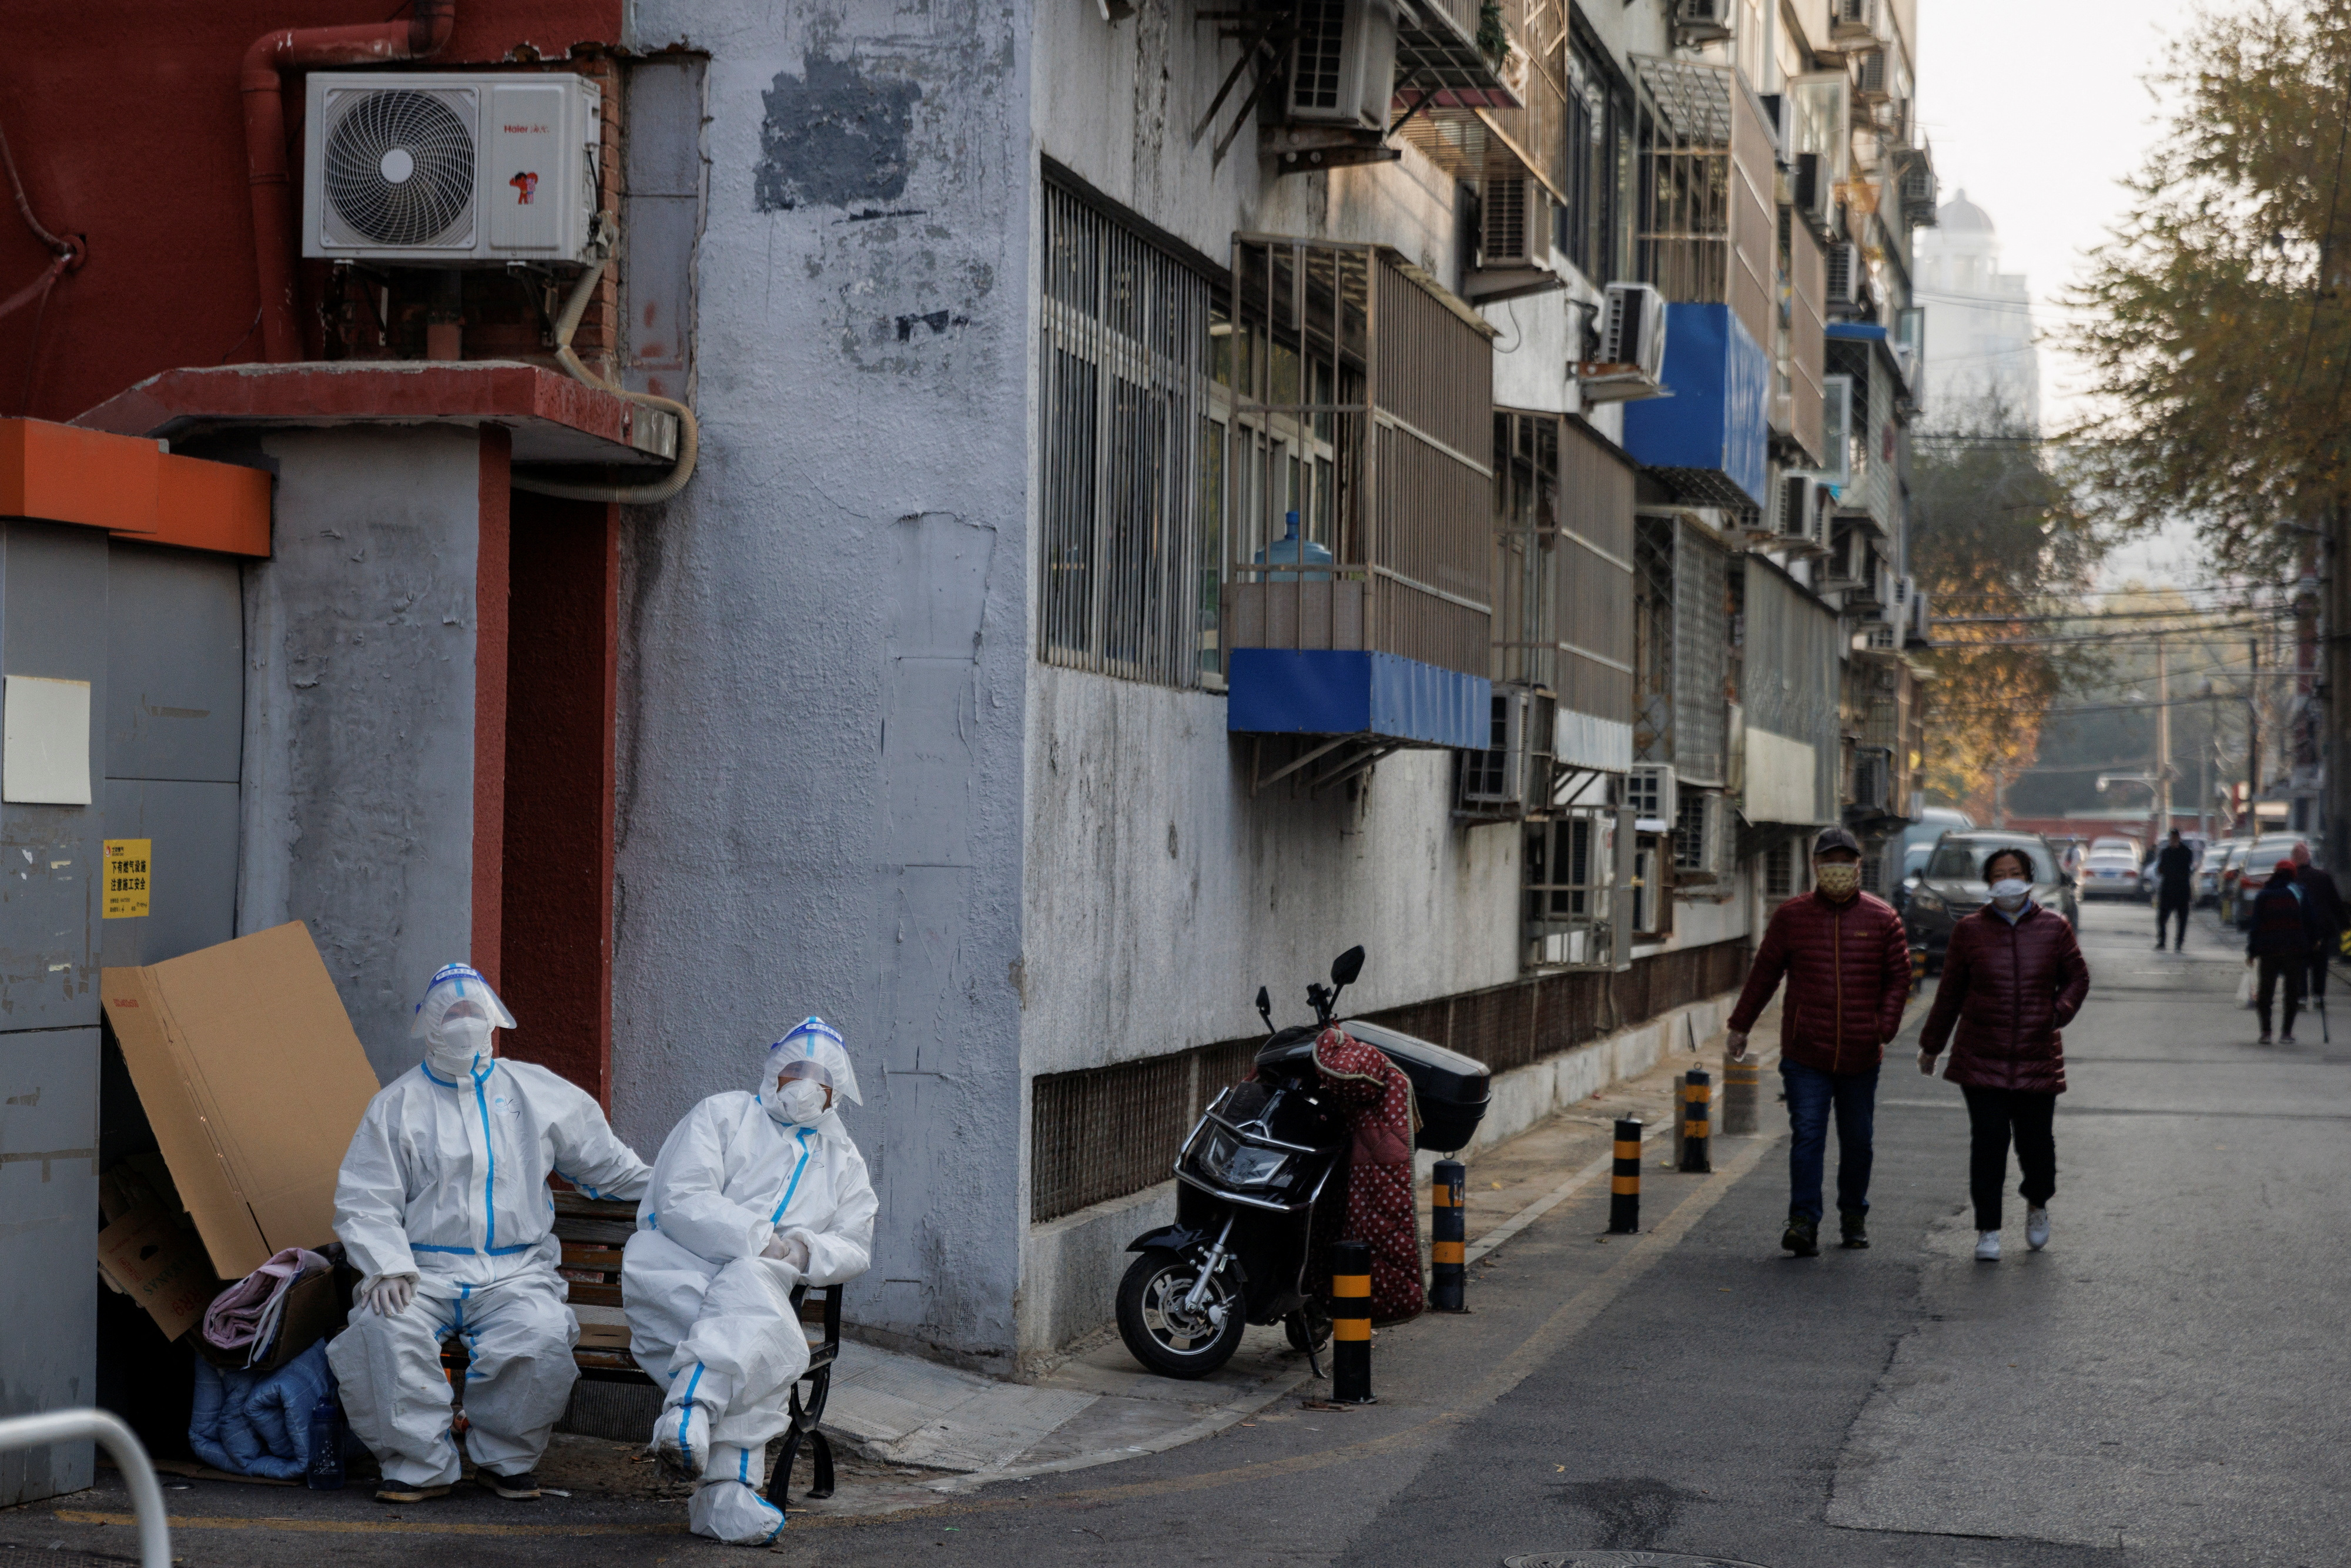 Epidemic prevention workers wearing protective suits sit in a closed building as the outbreak of the novel coronavirus disease (COVID-19) continues in Beijing.